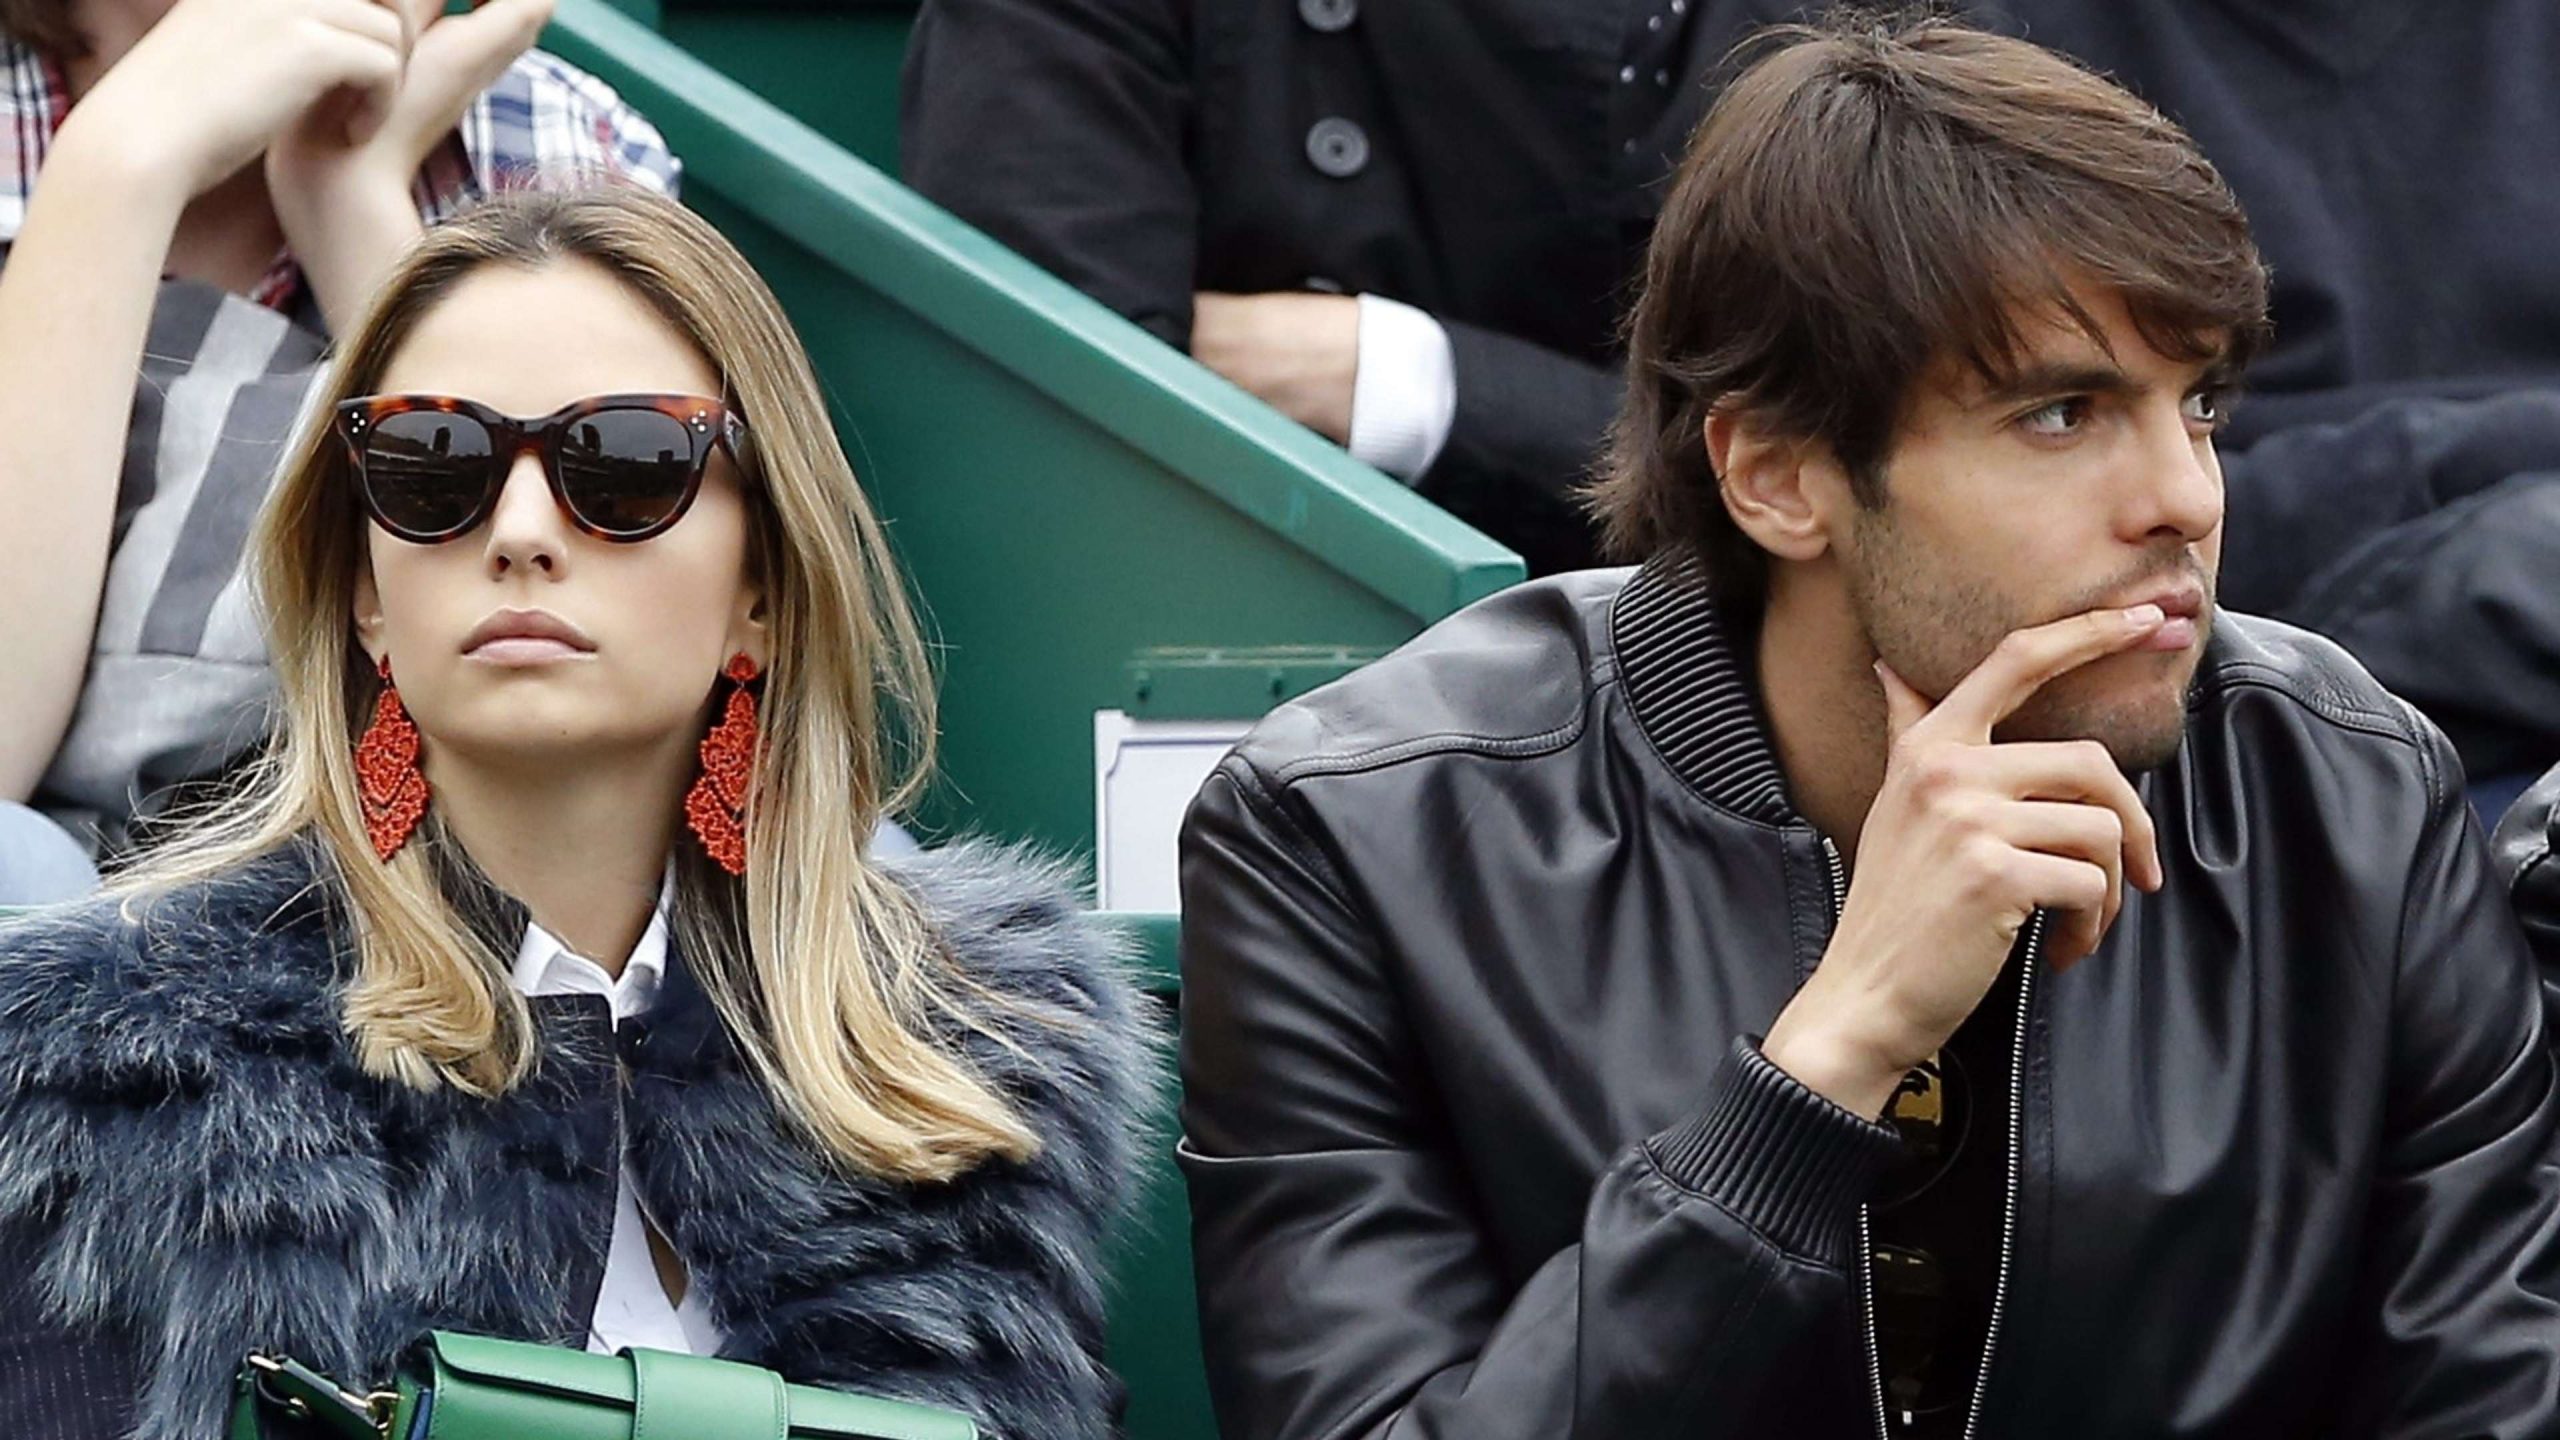 FOREIGN: Kaka’s Ex-Wife Denies Divorcing Footballer Due to Perfection; Announces Expectation of First Child